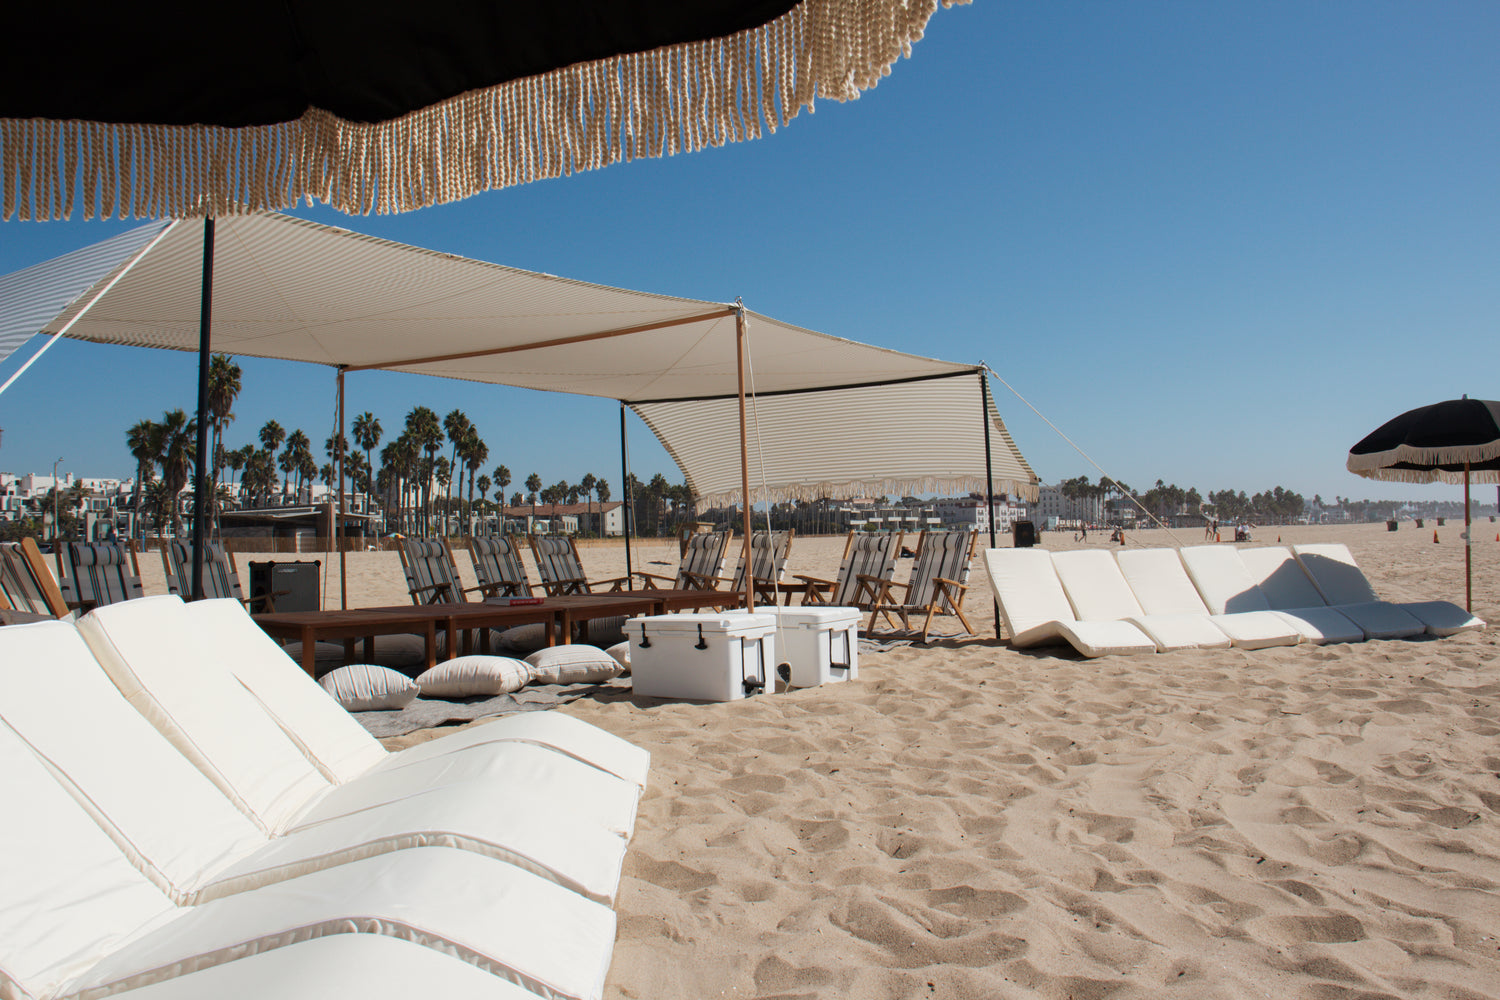 Large beach cabana rental in Los Angeles for corporate events and special events with beach chairs, beach lounges, beach umbrellas, and beach tent.